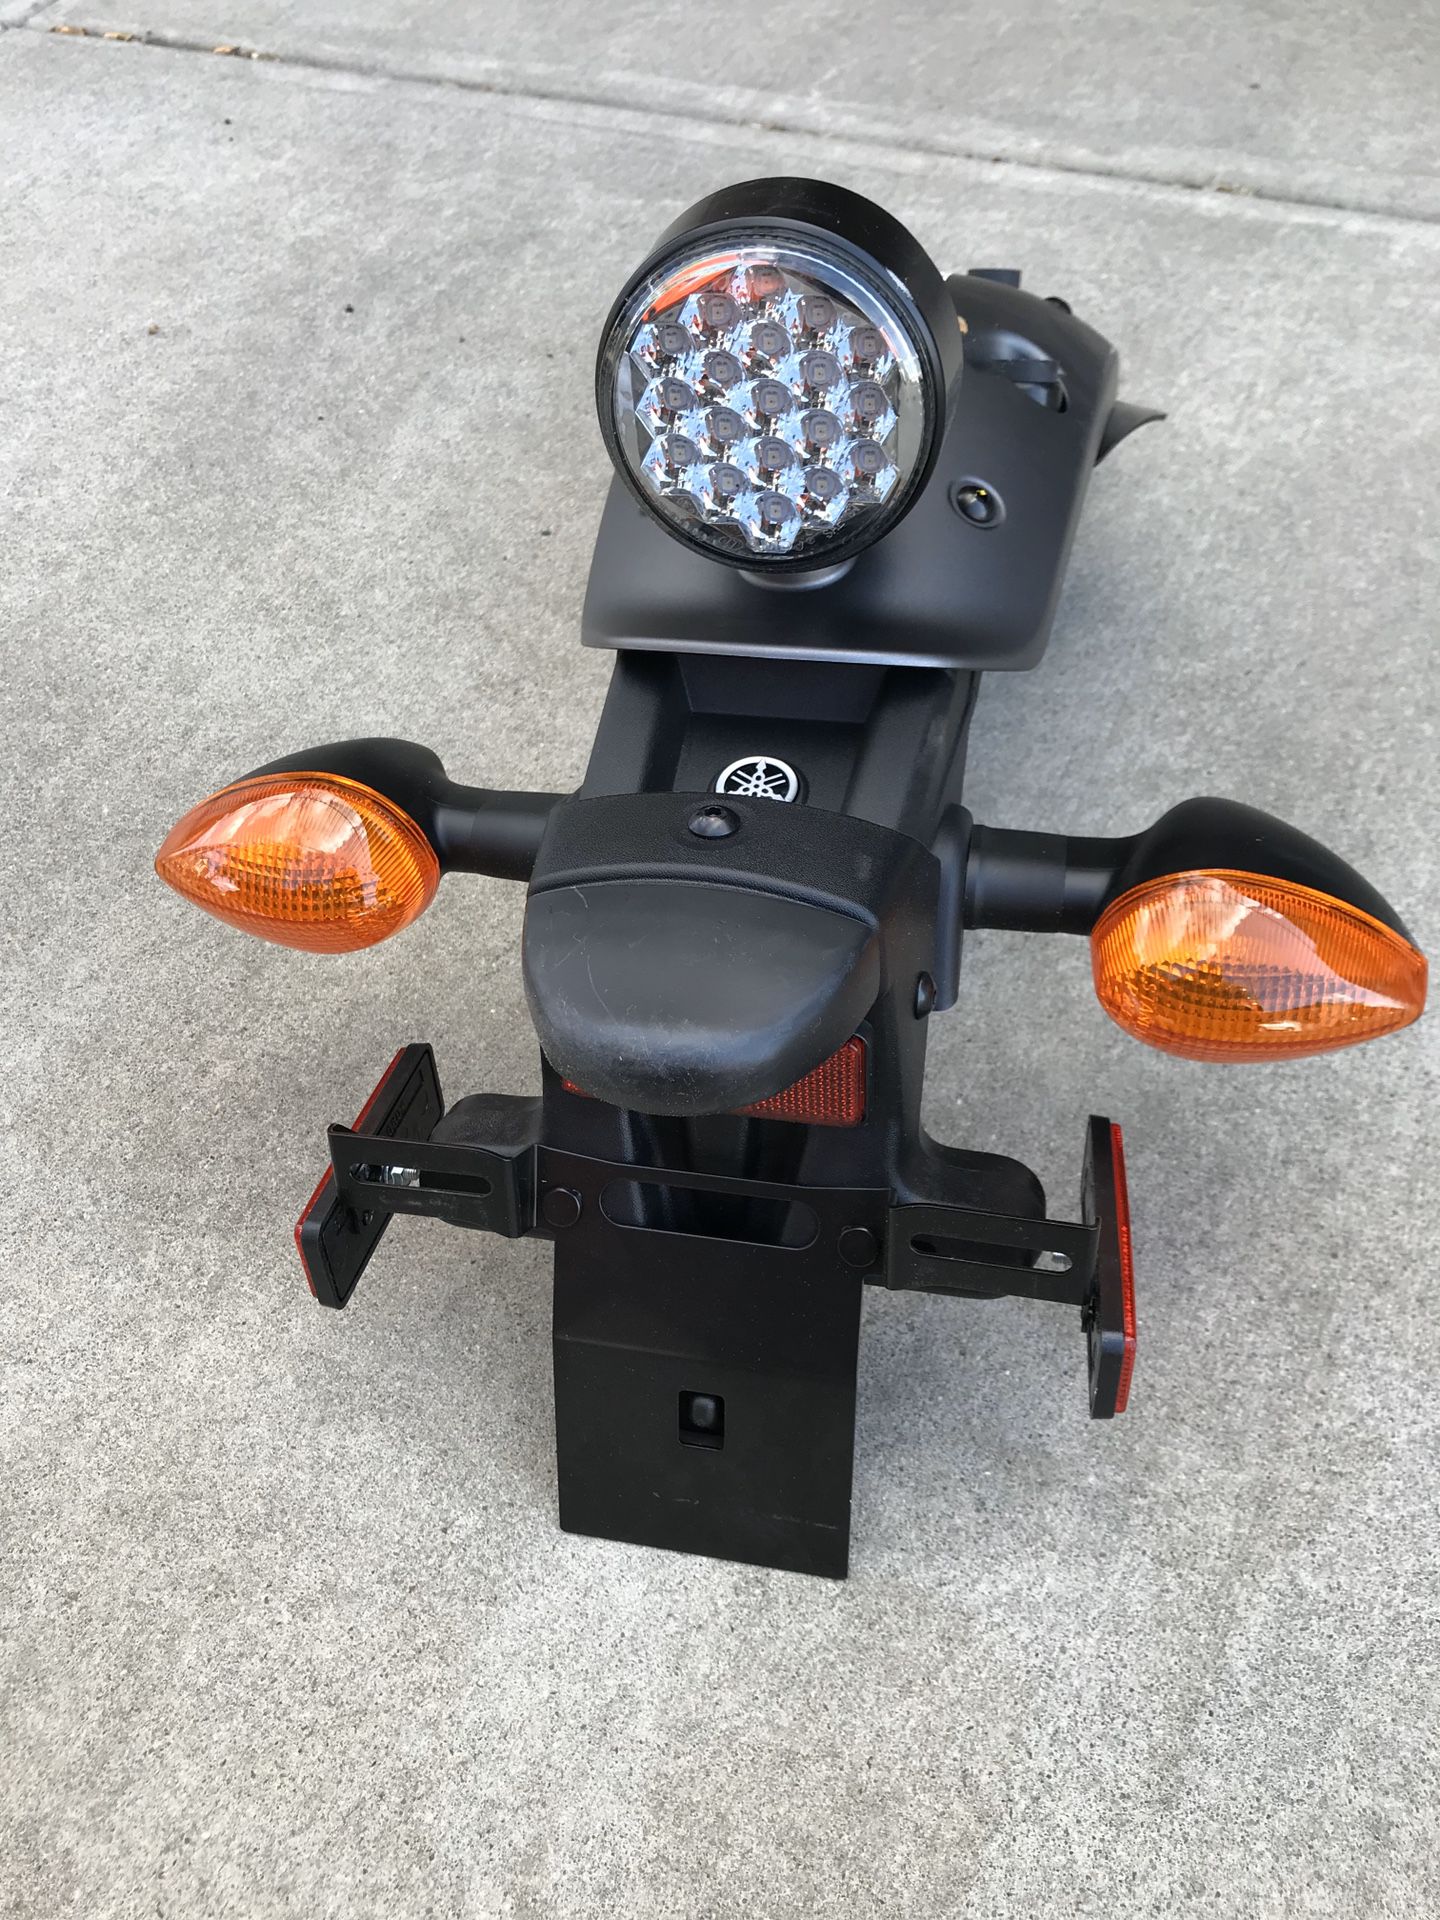 XSR700 turn signals and license plate holder